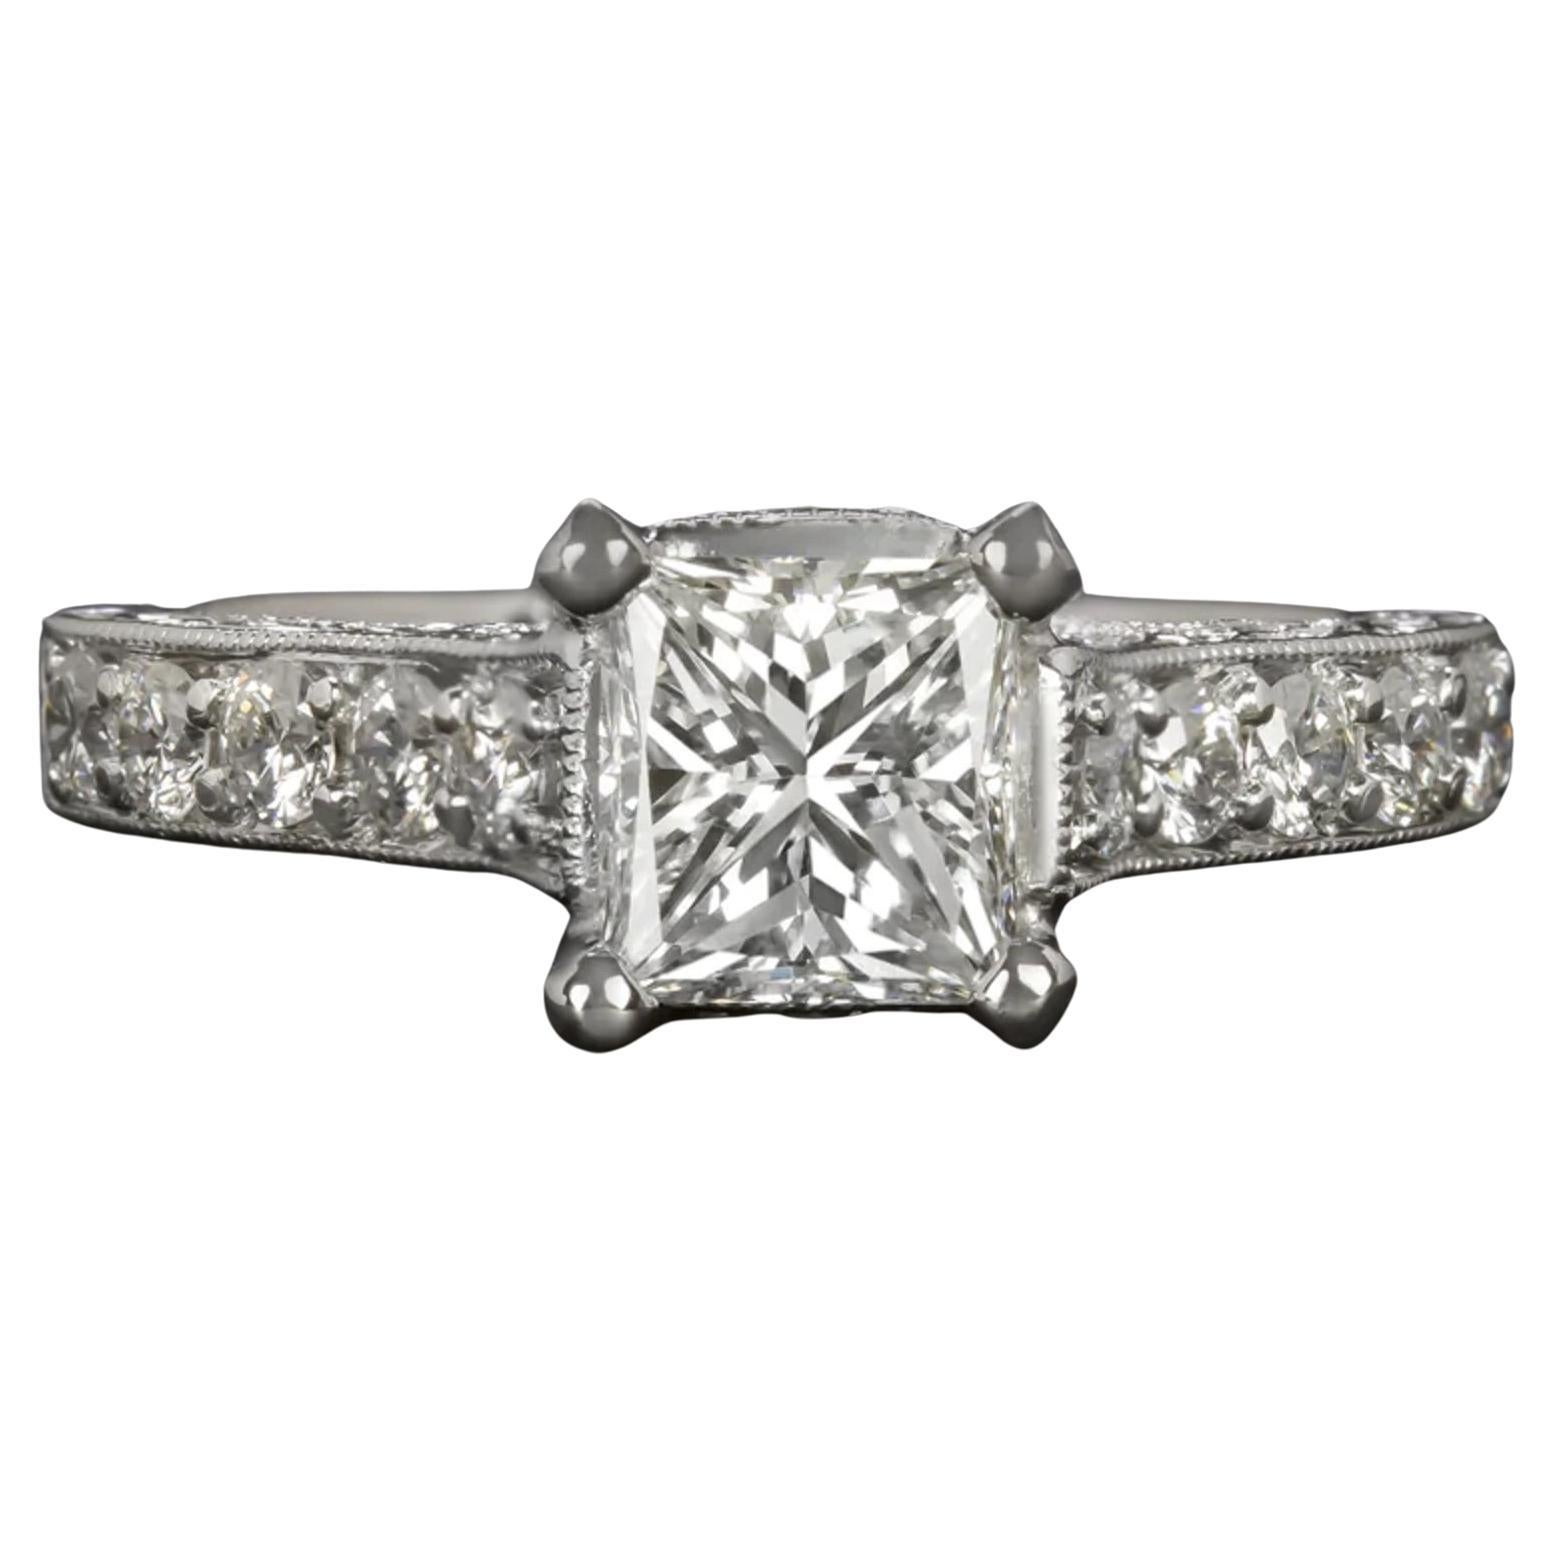 GIA Certified Radiant Cut Diamond in a Luxurious 18k White Gold Setting